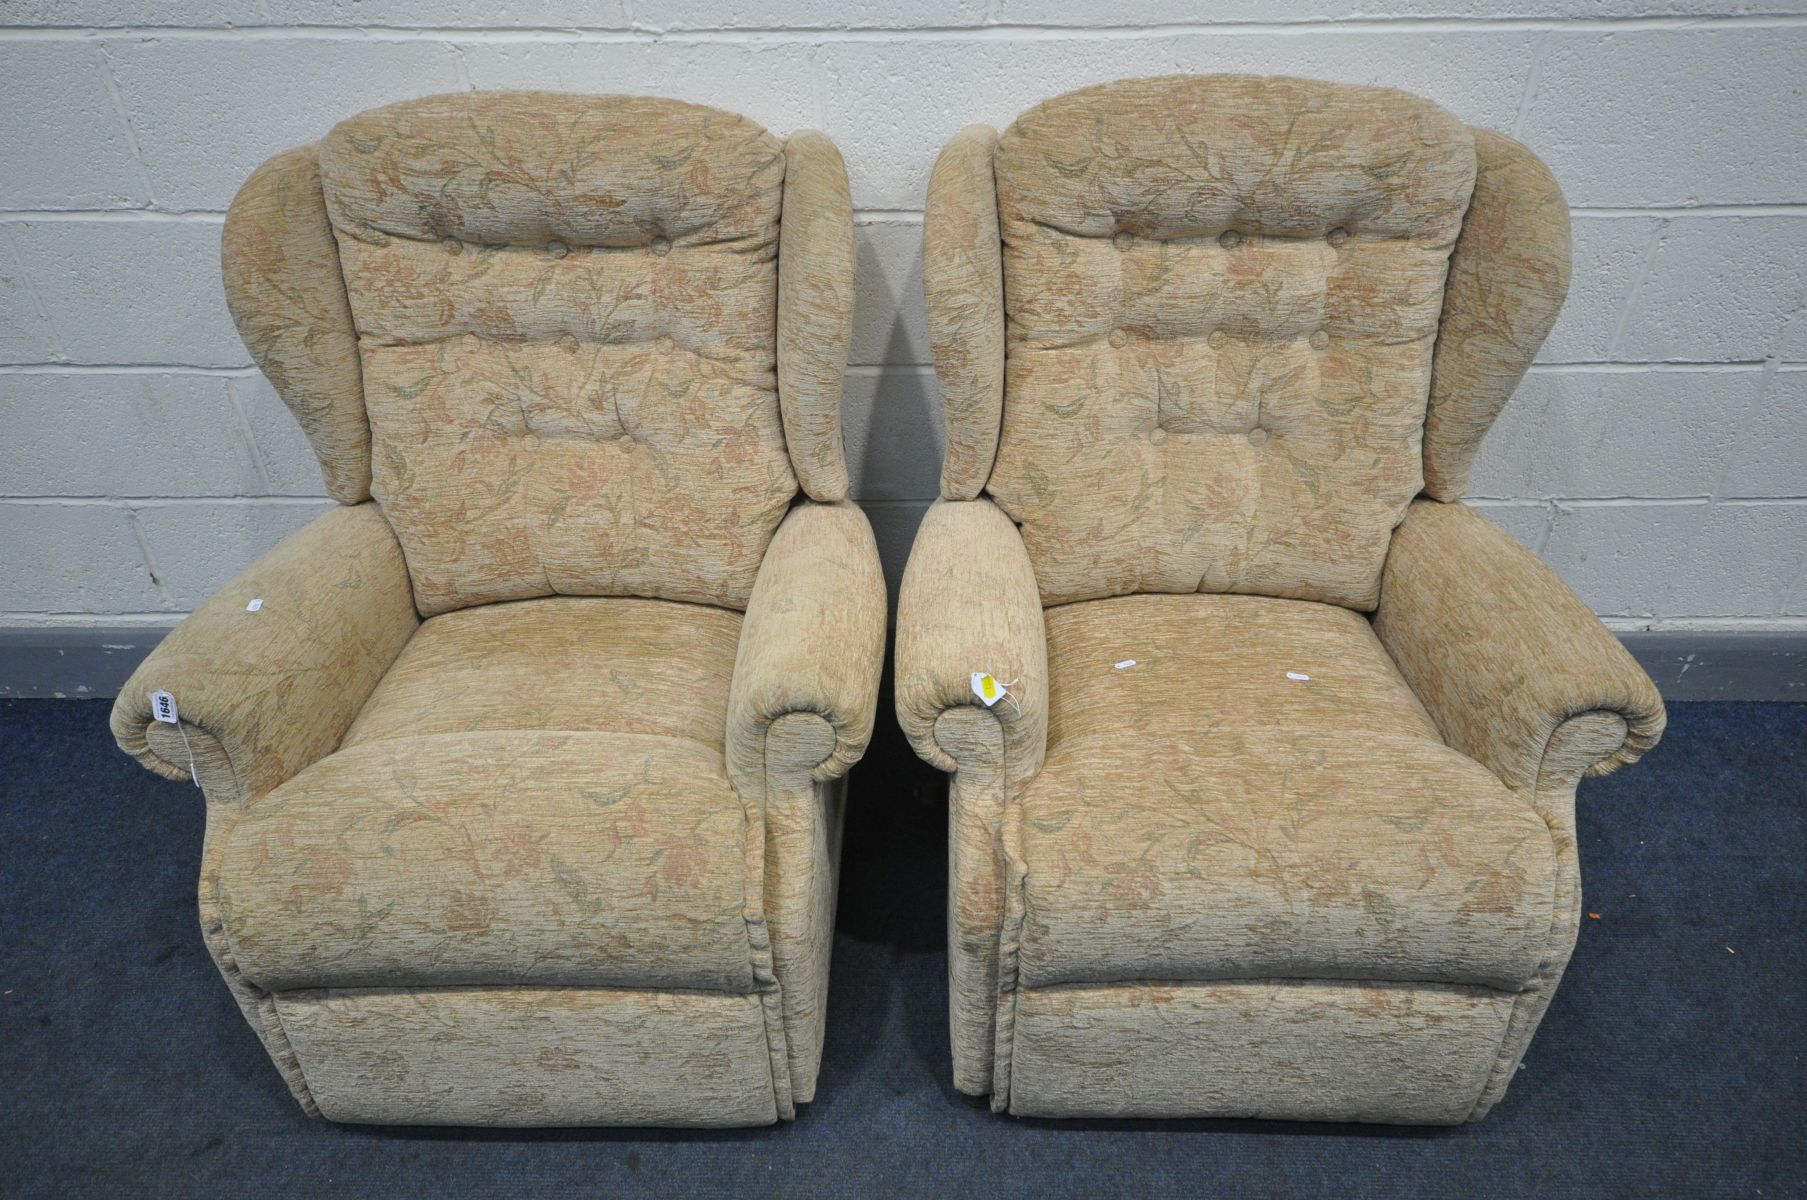 A PAIR OF FLORAL BIEGE UPHOLSTERED MANUAL RECLINING ARMCHAIRS